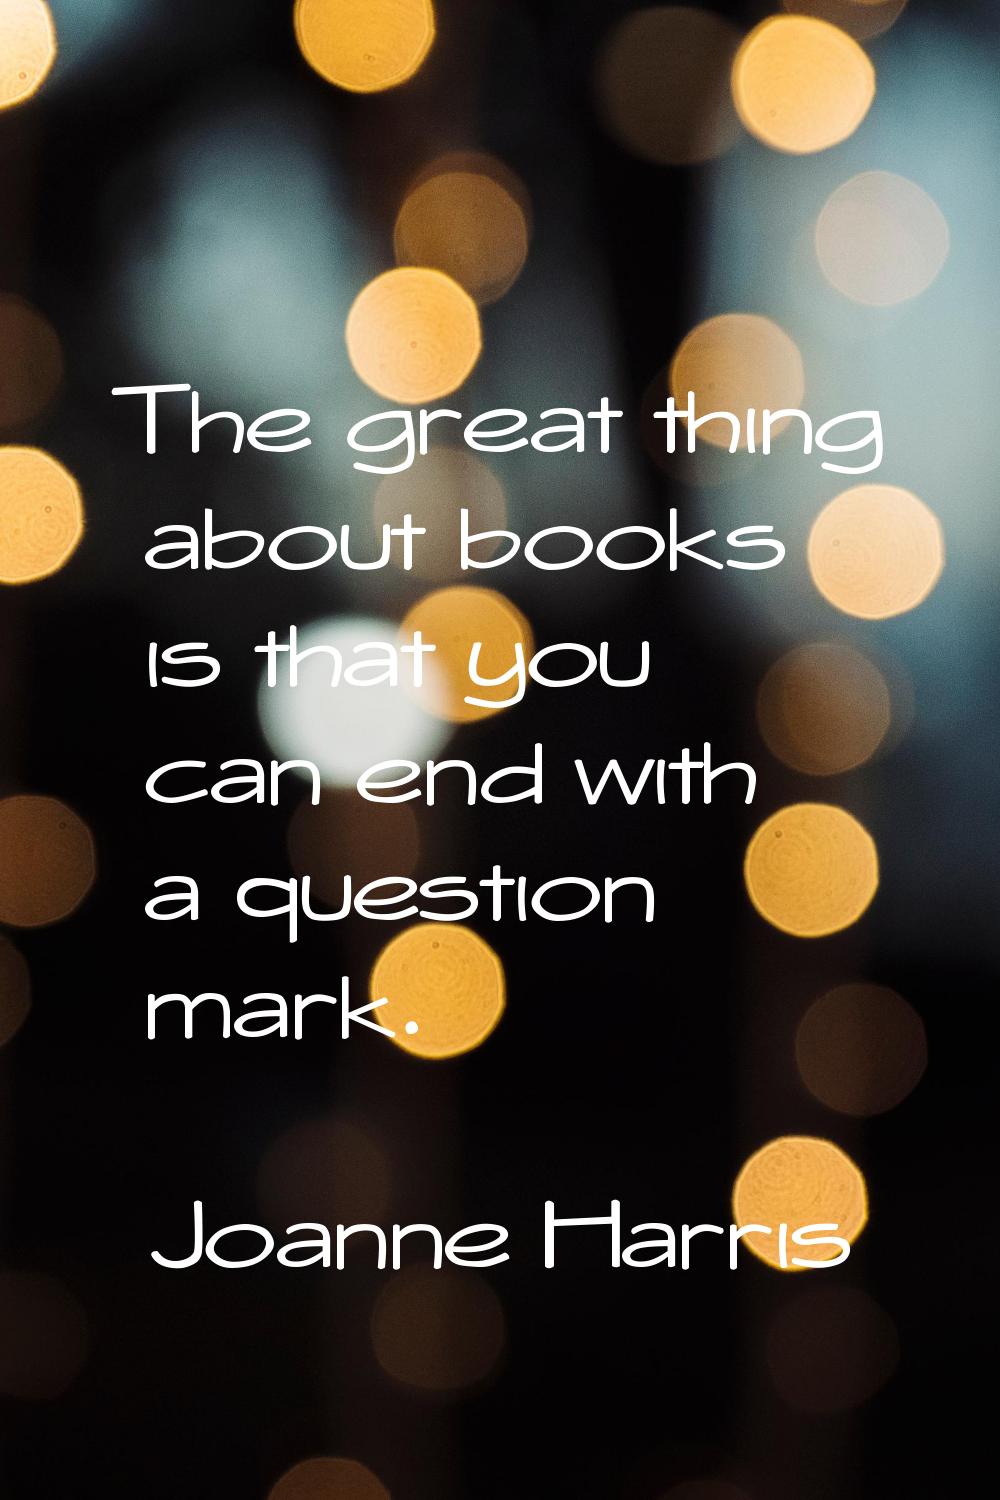 The great thing about books is that you can end with a question mark.